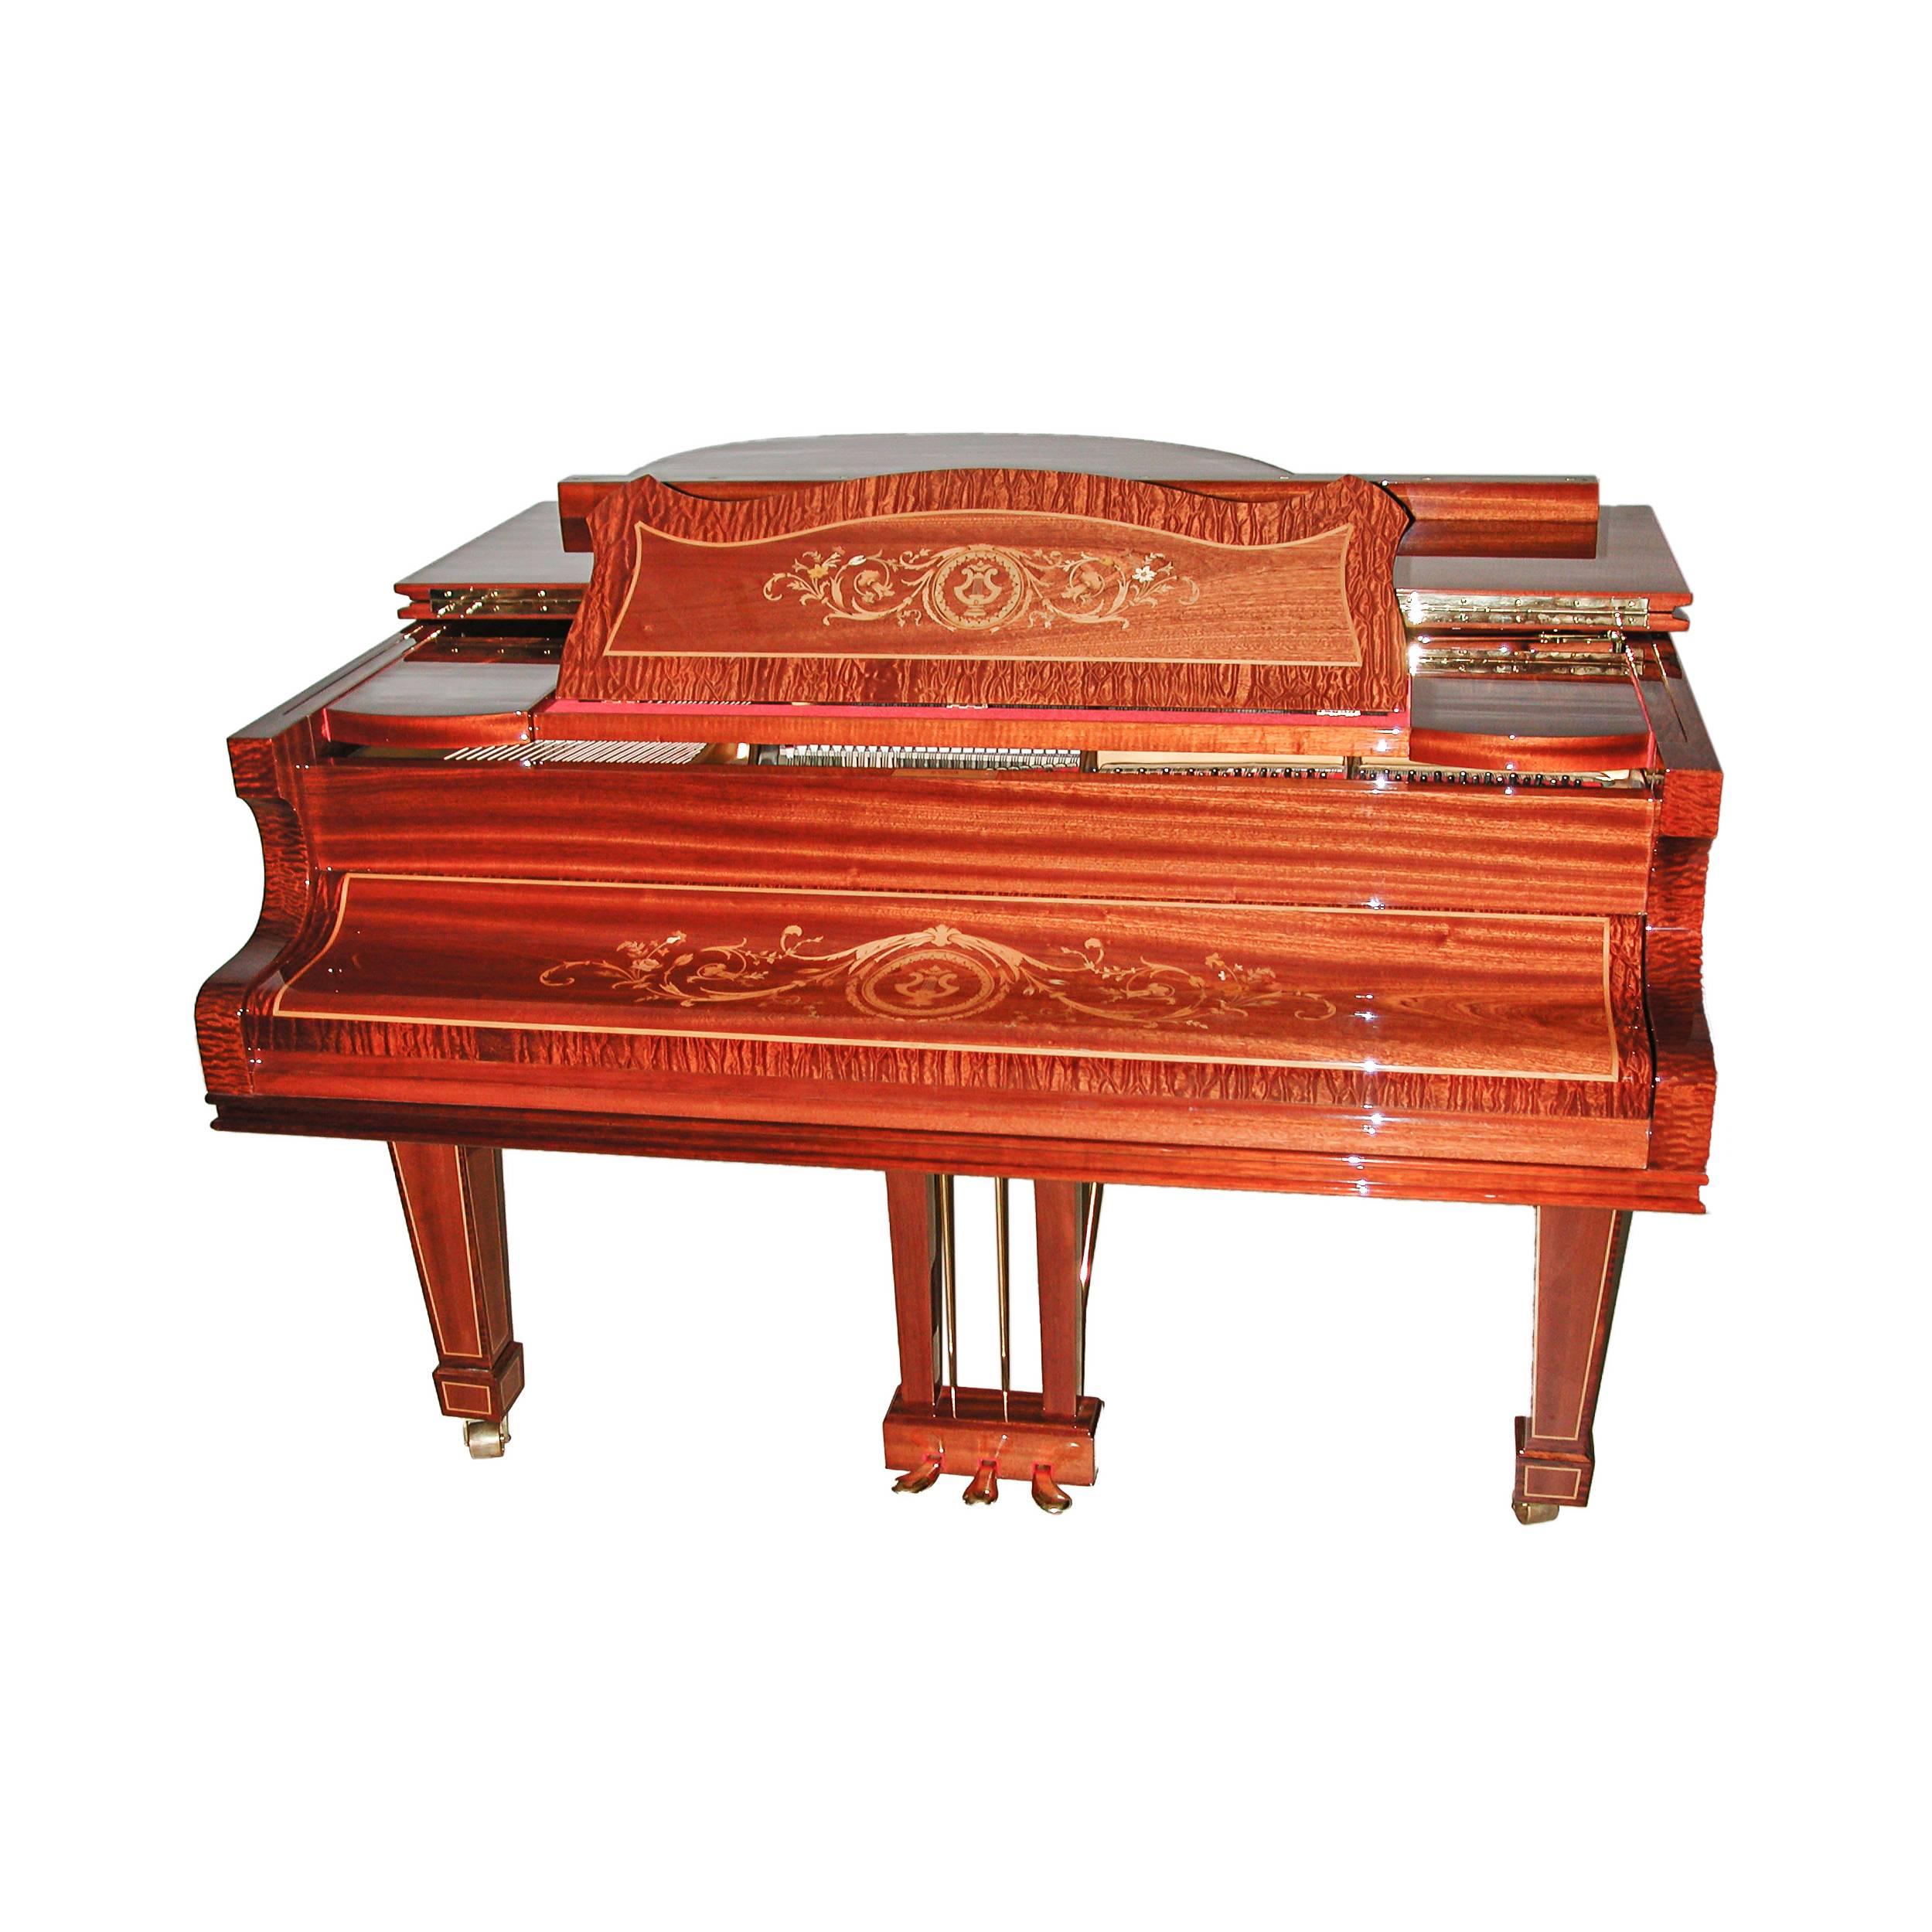 Contemporary Single Handmade German Luxury Grand Piano Richard 7th with Inlays High Gloss For Sale